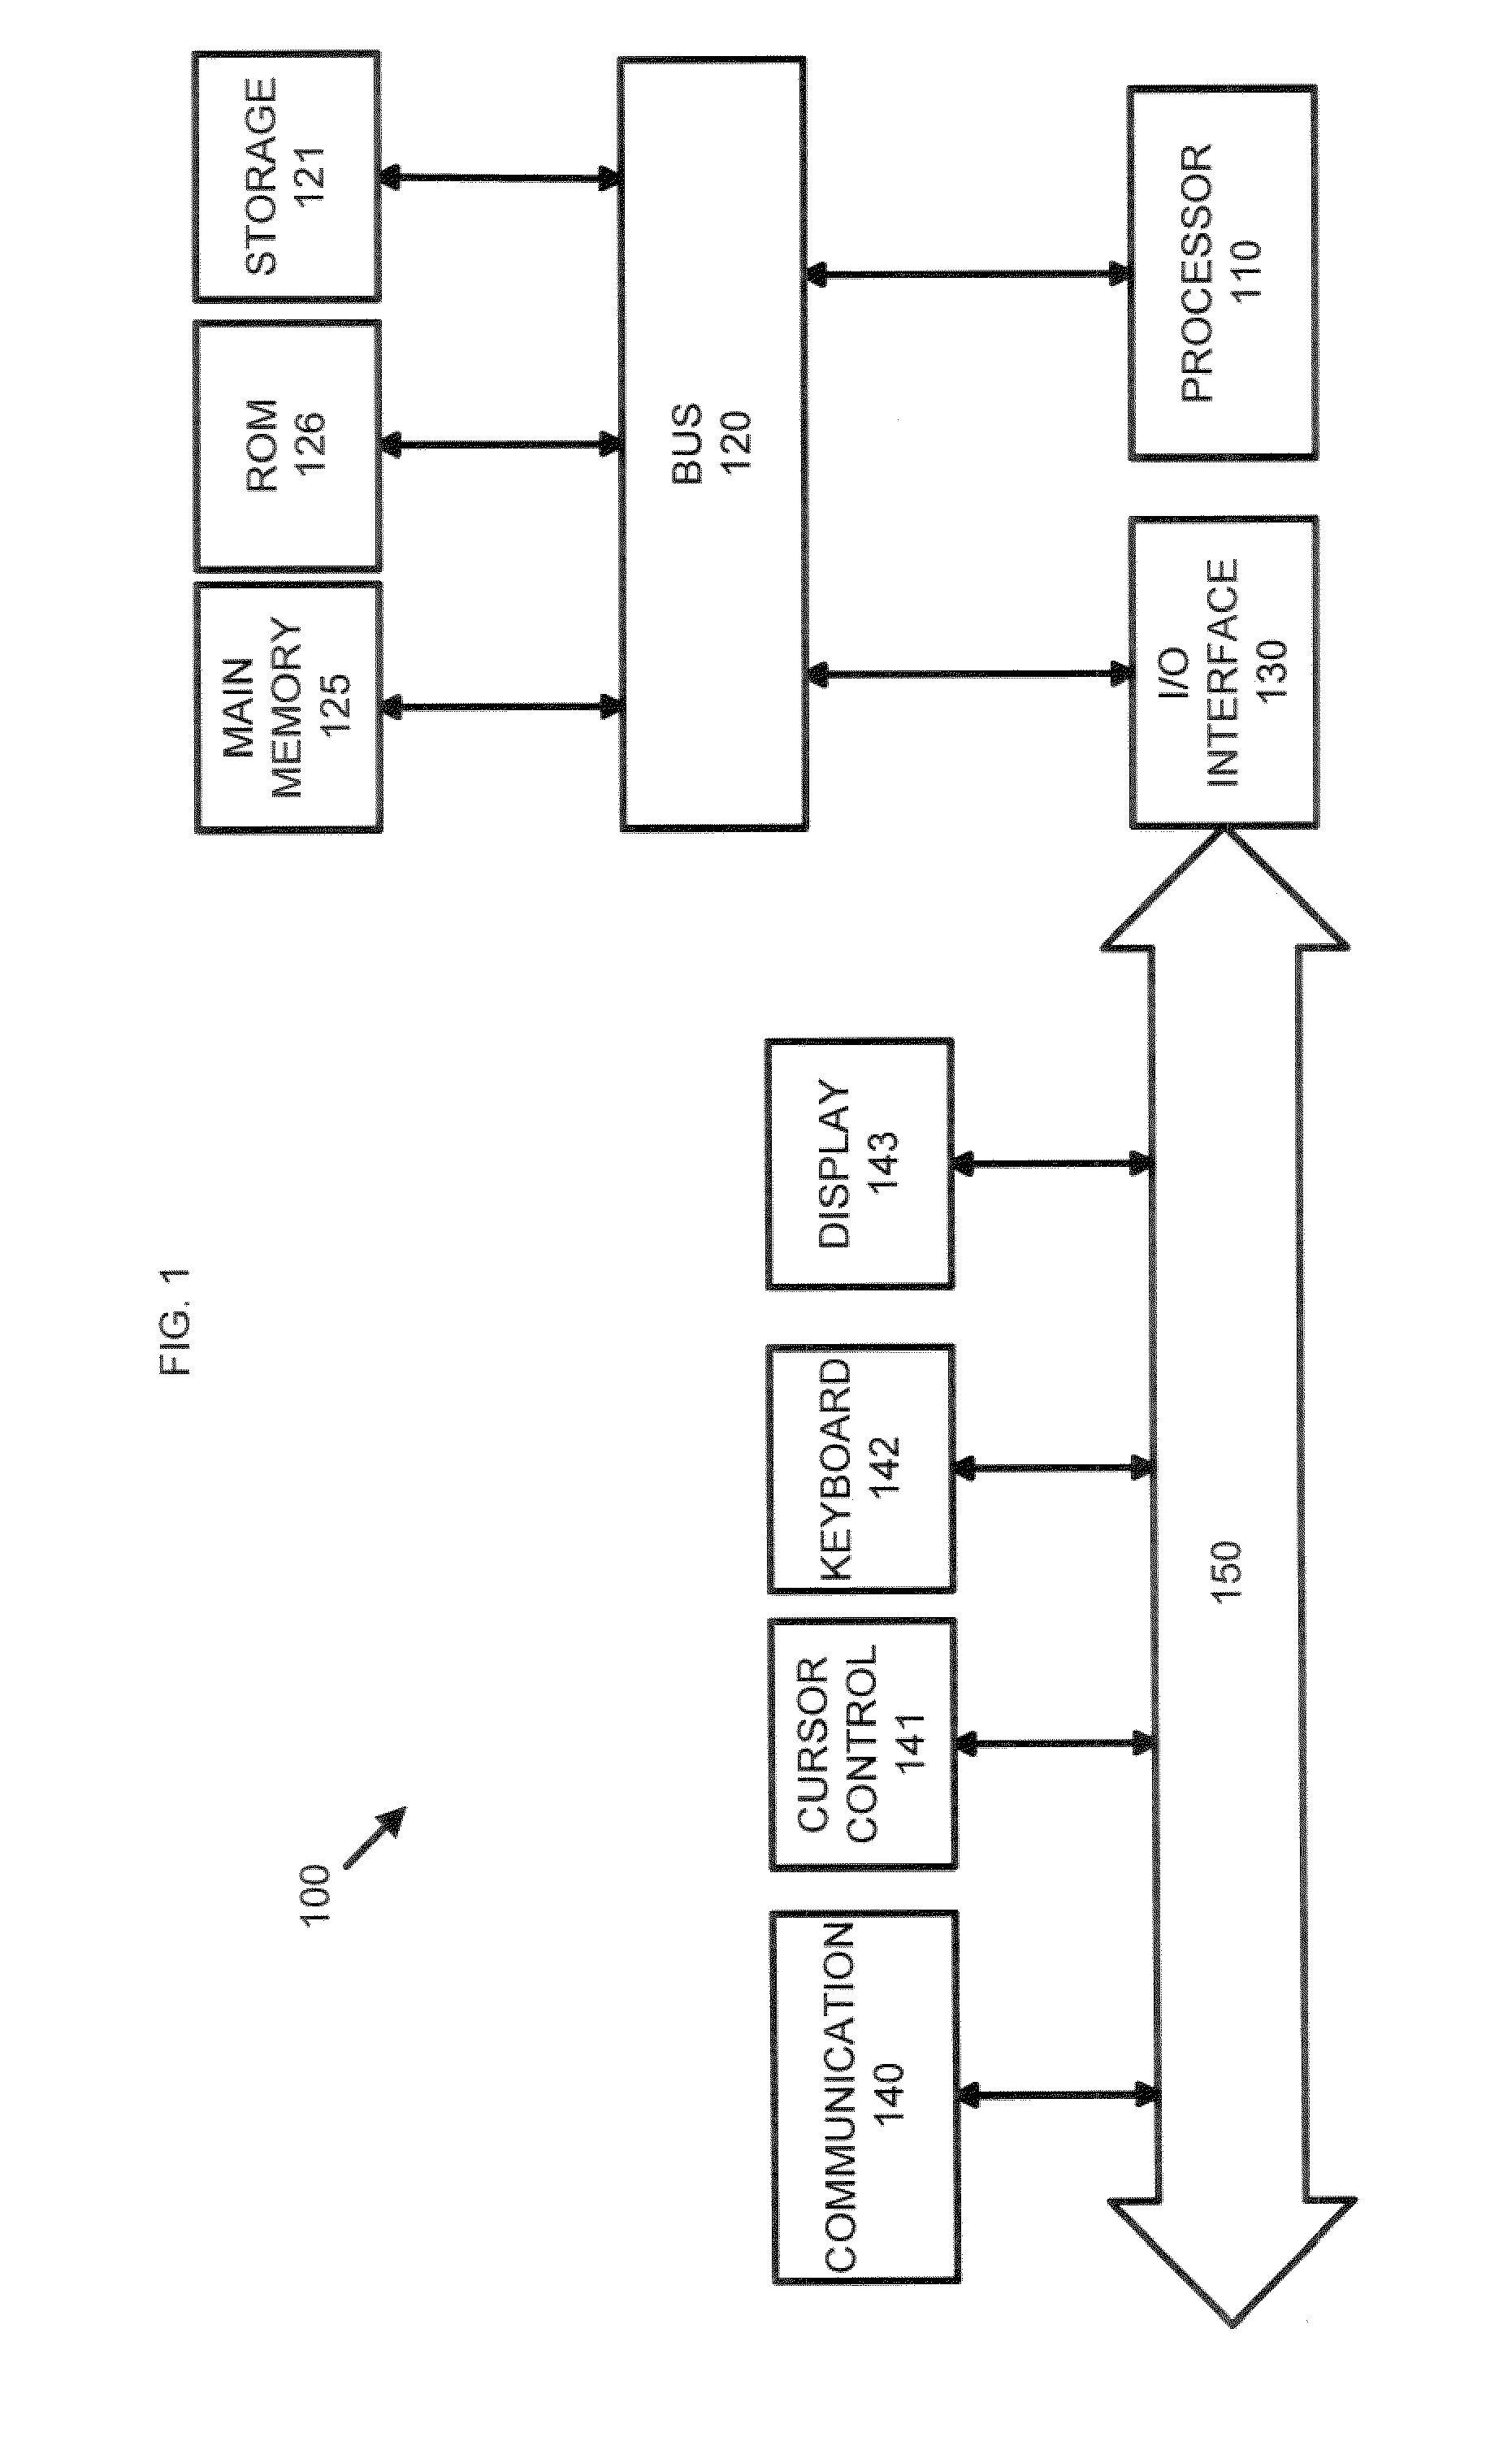 System and method for pervasive computing